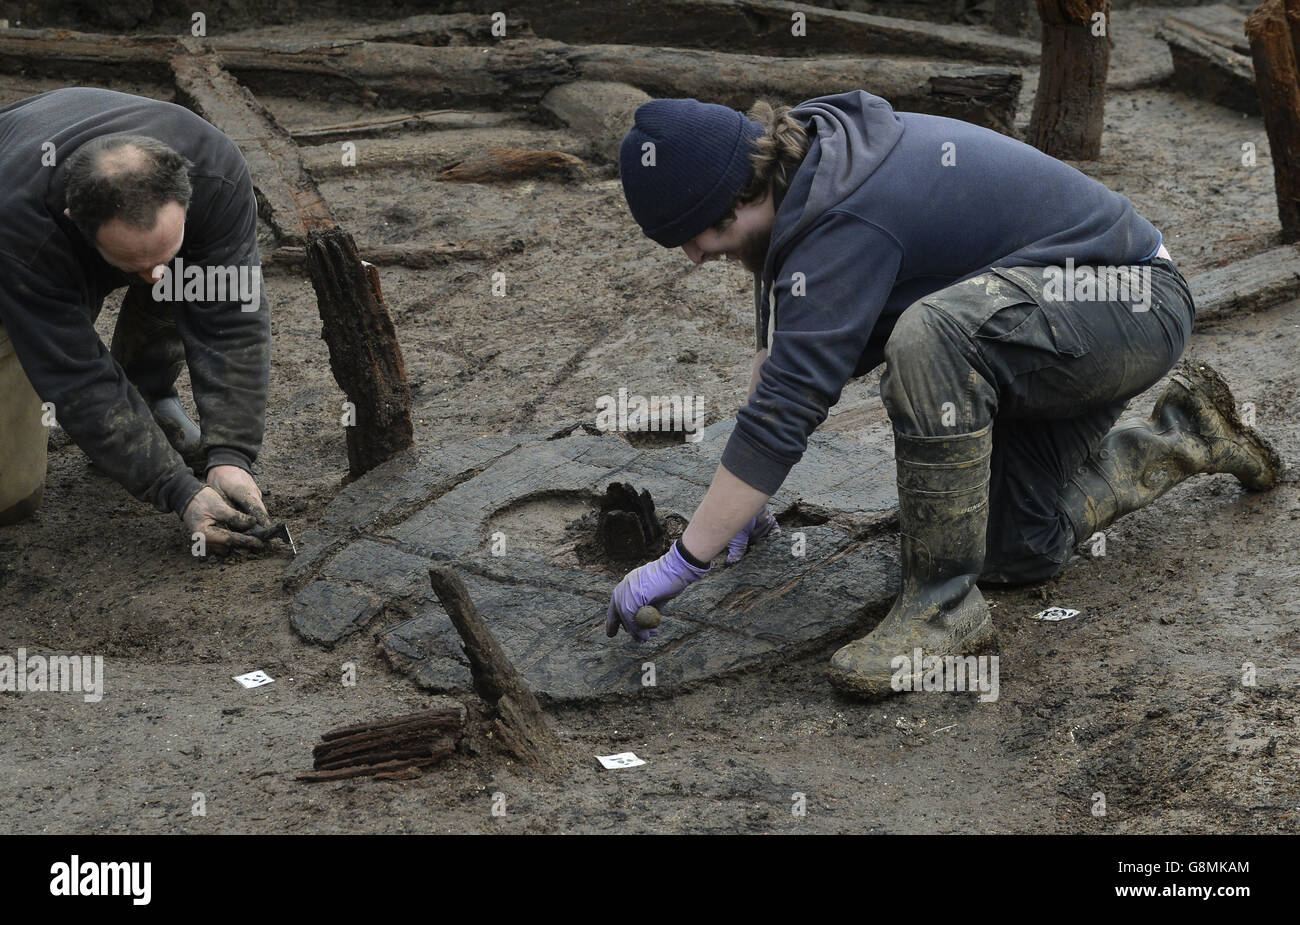 Archaeologists work to extract the earliest complete Bronze Age wheel found in Britain, dated 1100-800 BC, during the excavation of the Must Farm site near Peterborough in Cambridgeshire. Stock Photo